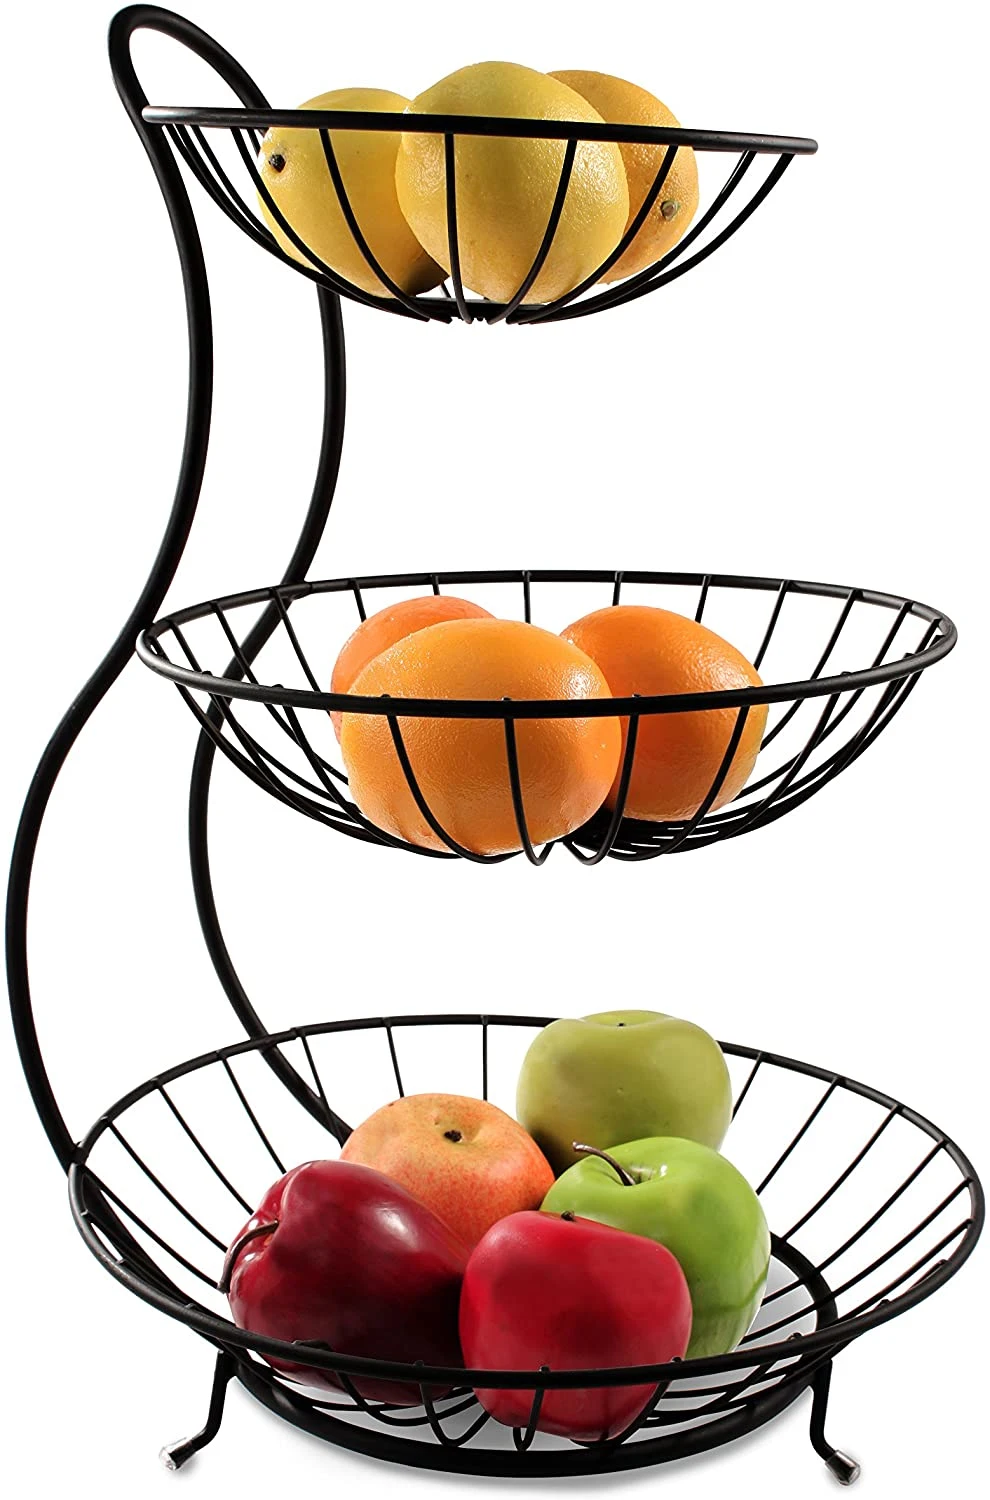 All in One Yumi Arched Server Stacked 3-Tier Bowls Dining Table Kitchen Counter Organizer Modern Fruit Basket Stand